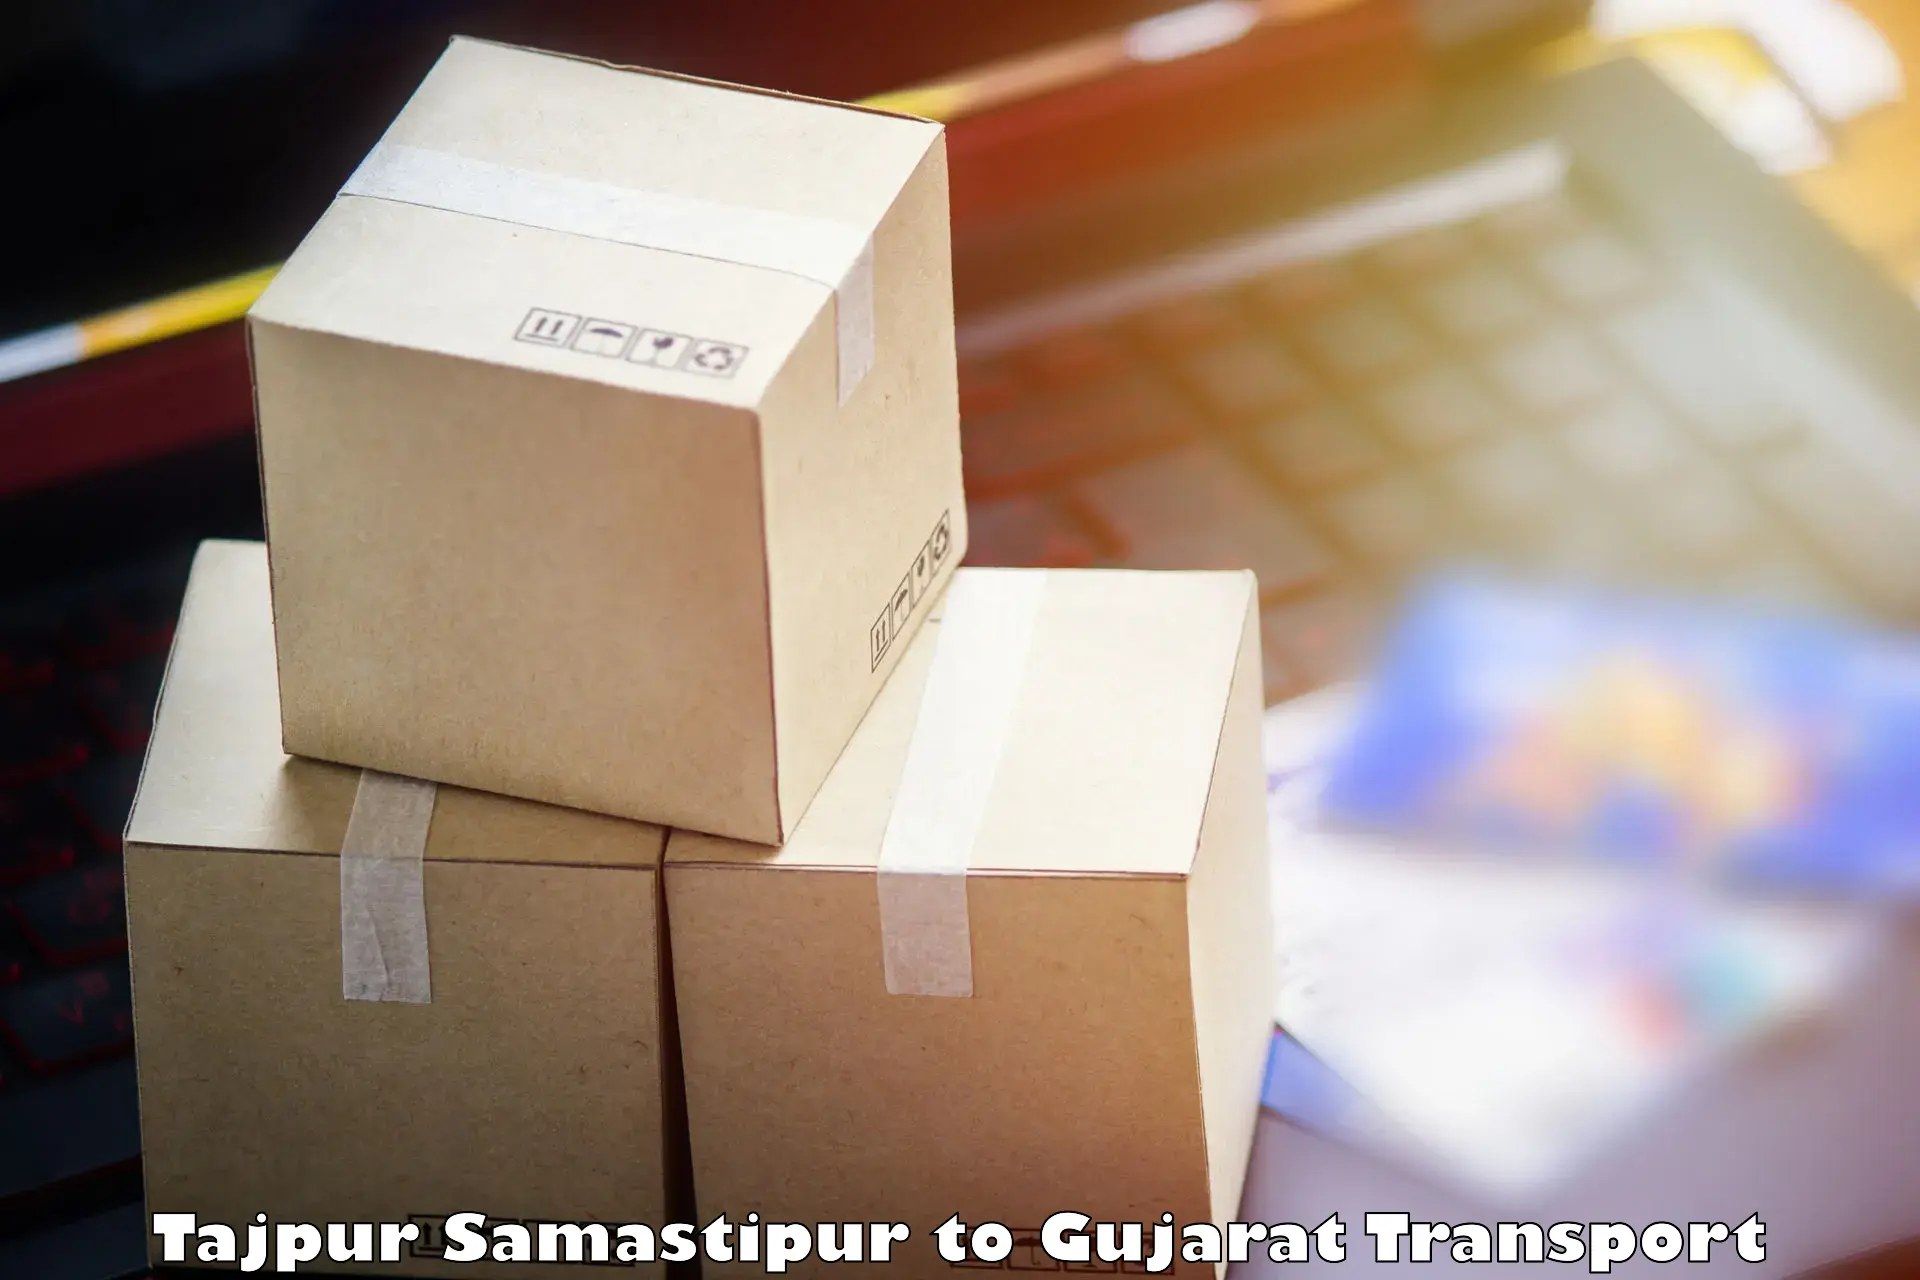 Air freight transport services Tajpur Samastipur to Sanand